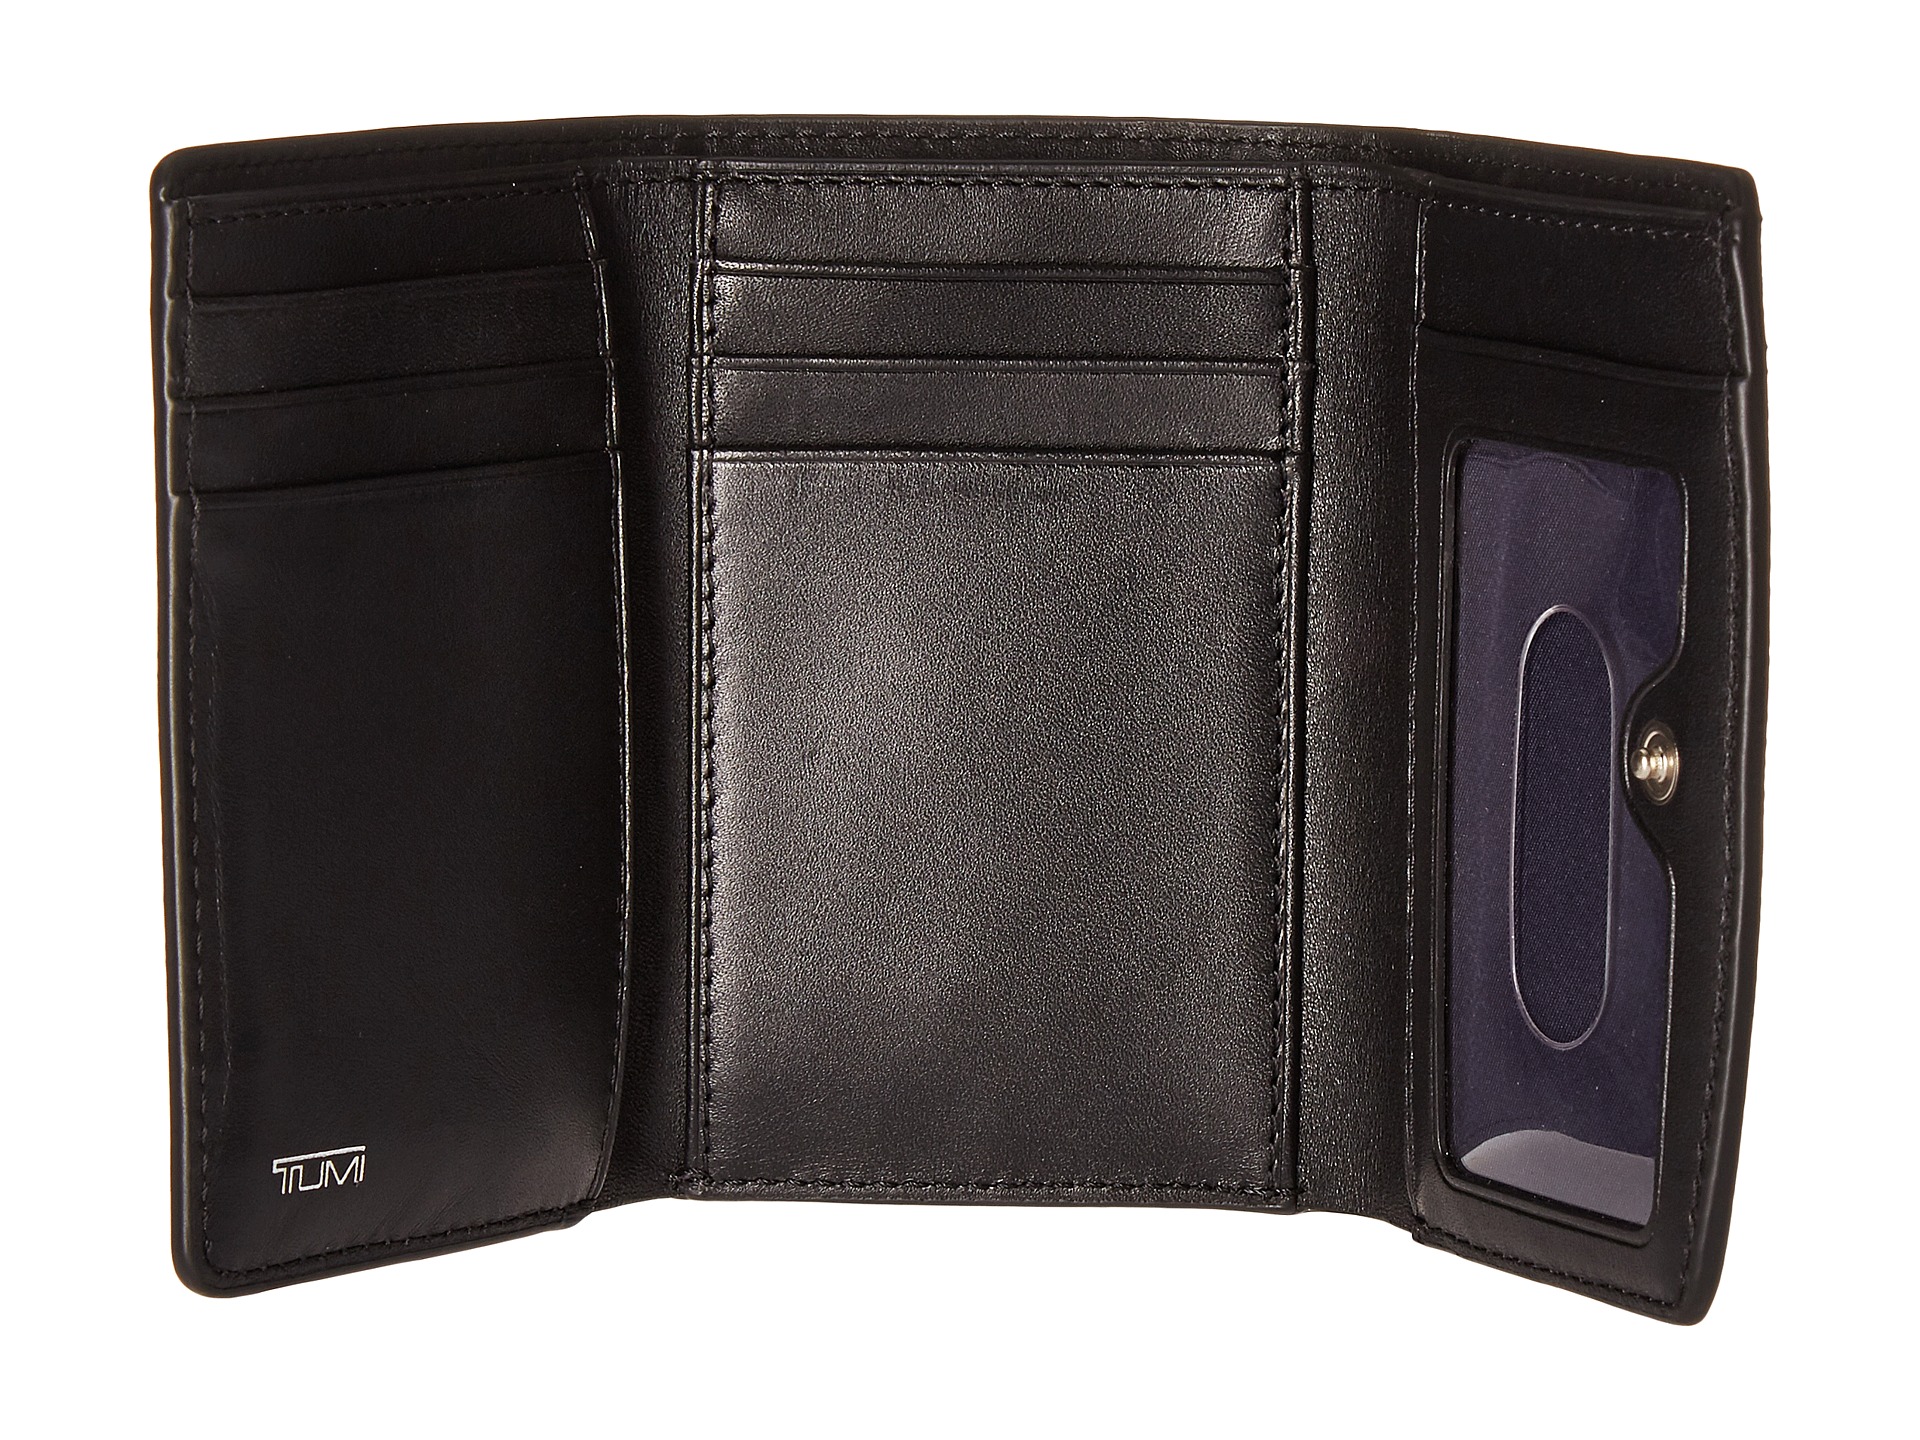 Tumi Sinclair Trifold Wallet at Zappos.com